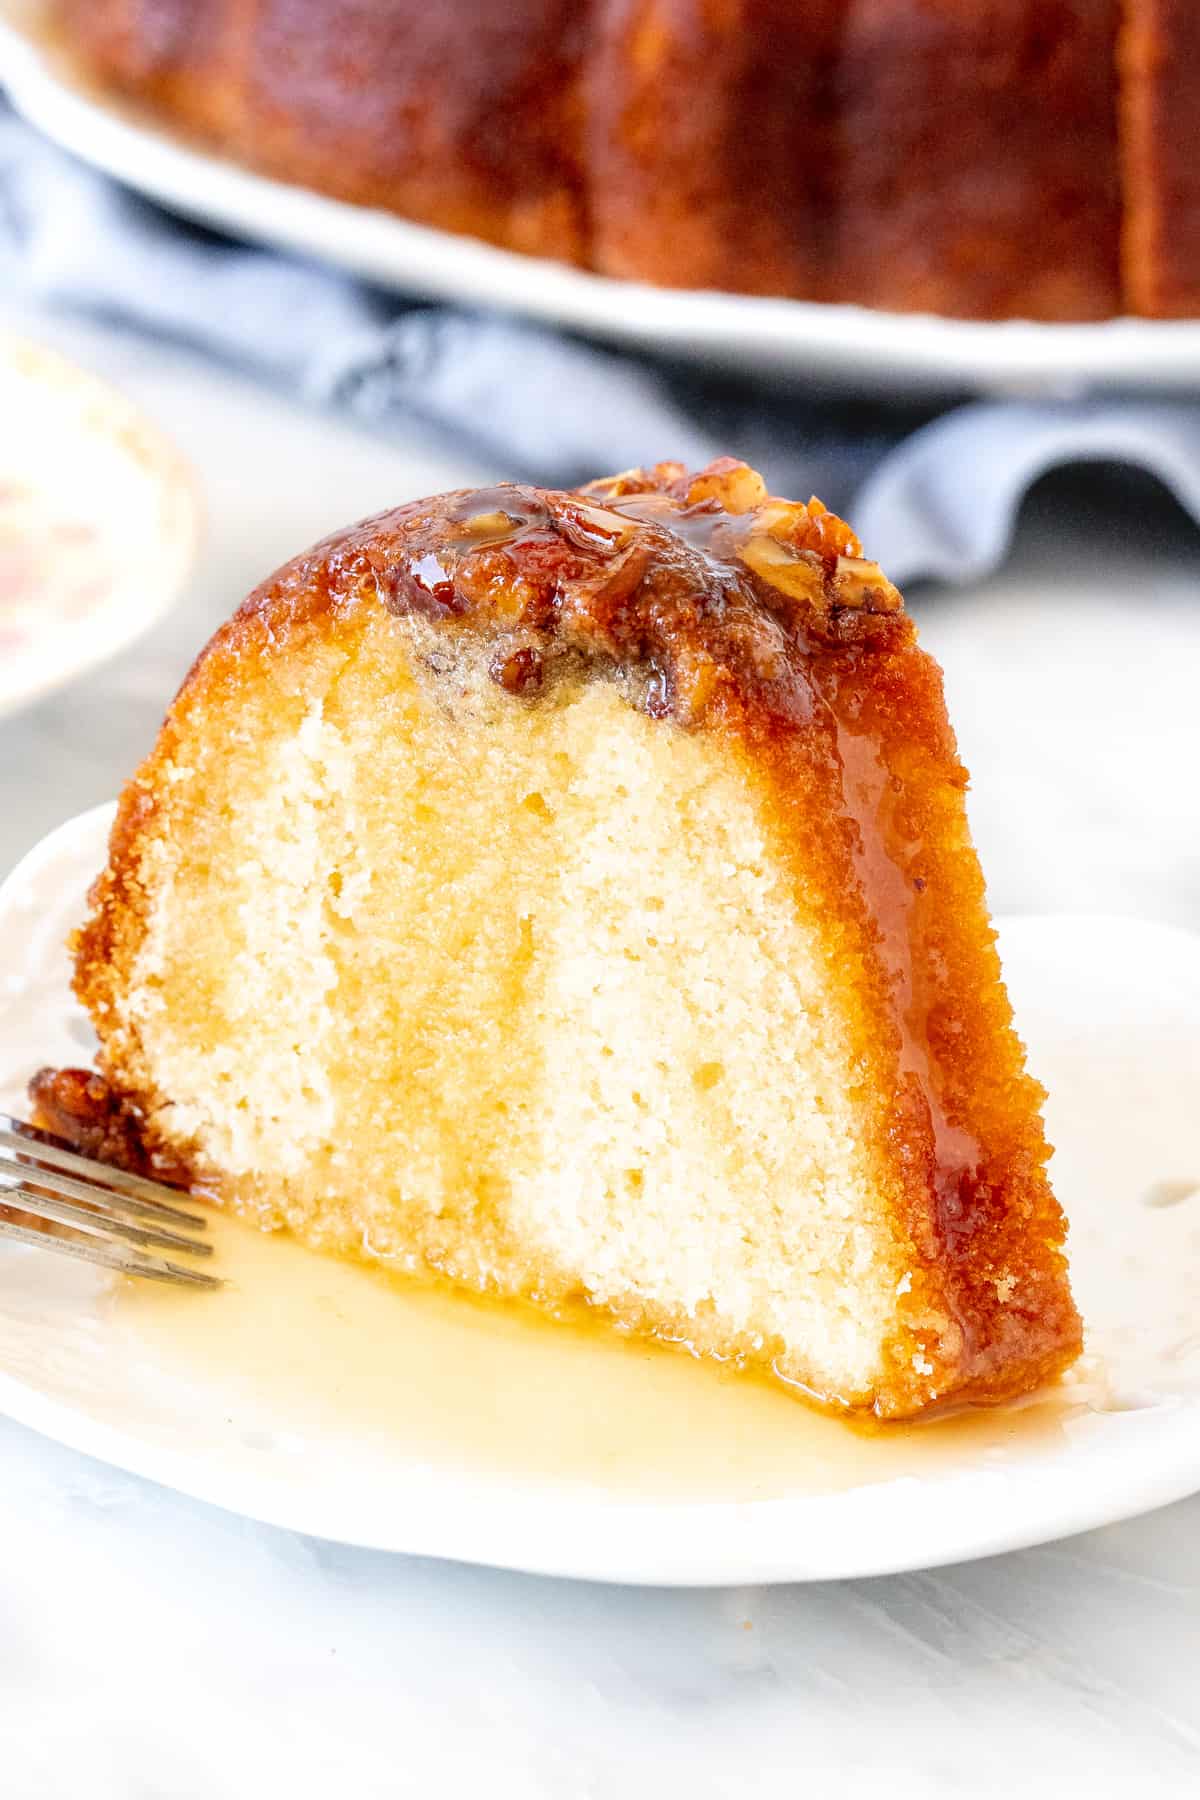 Slice of rum cake with rum sauce poured over the top.